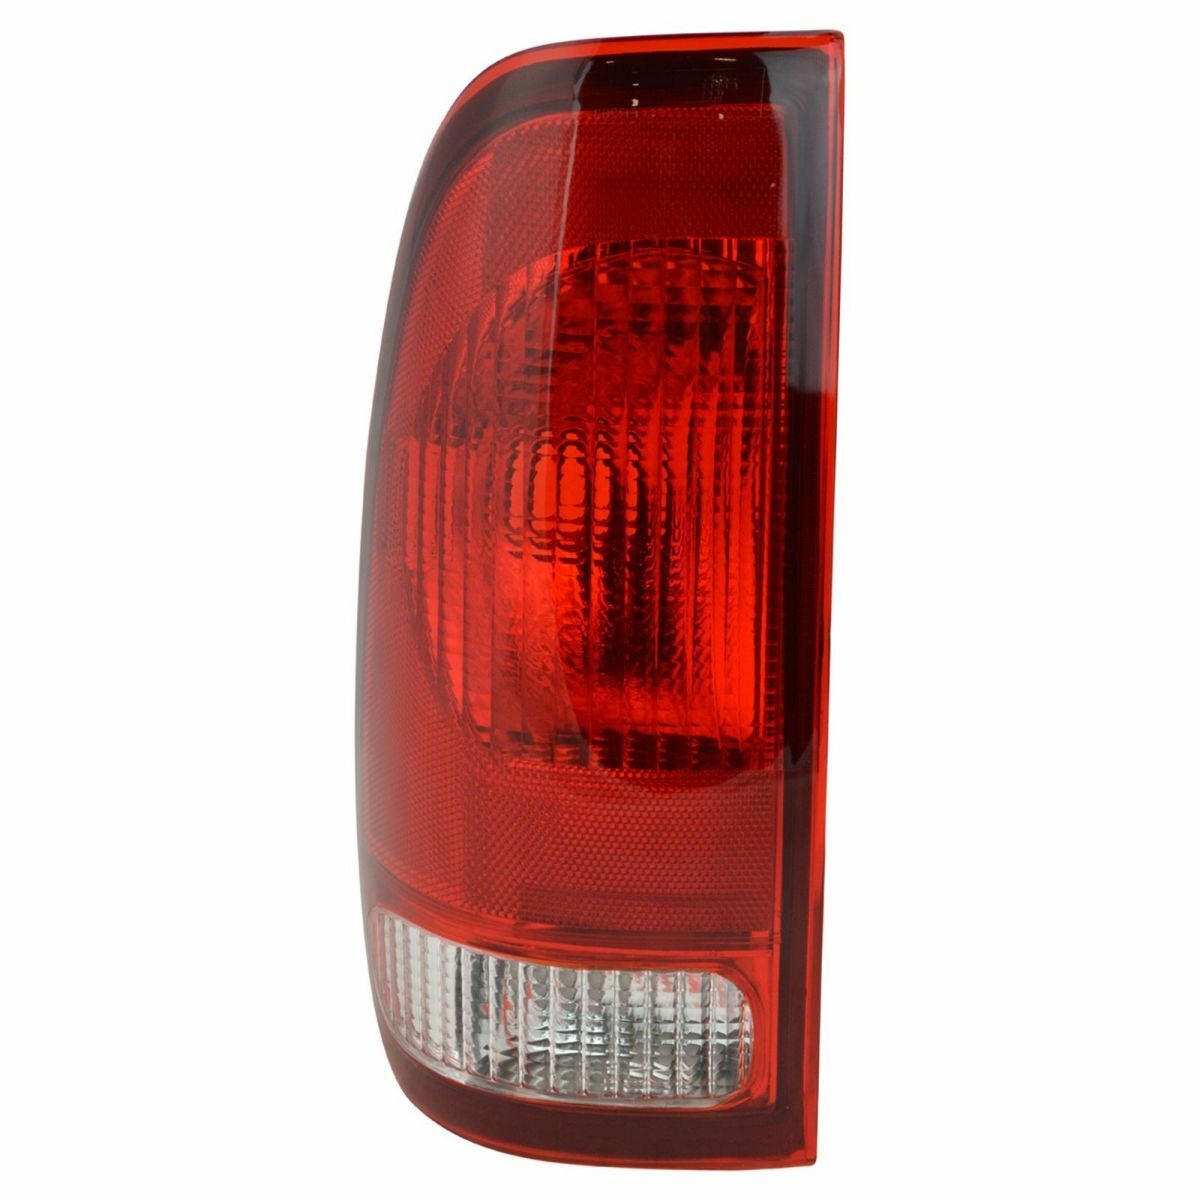 Taillight Taillamp Rear Brake Light Driver Side Left LH for Ford F-Series Truck